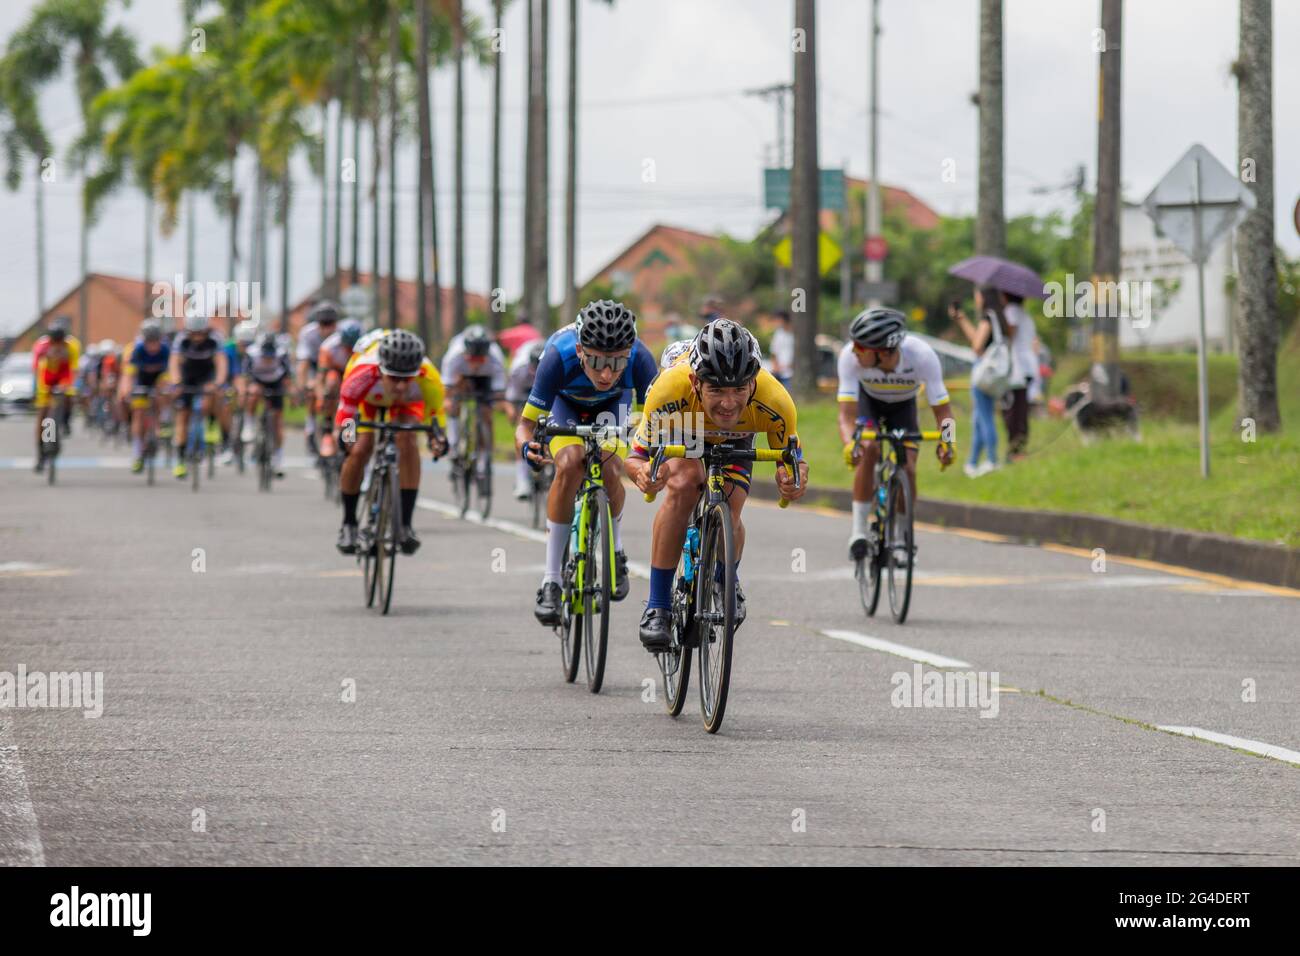 Pereira, Colombia. 20th June, 2021. Cyclists of the team Colombia Tierra de Atletas during the elite category race of the Colombian National Road Race Bicycle Championship in Pereira, Colombia, on June 20, 2021. Credit: Long Visual Press/Alamy Live News Stock Photo